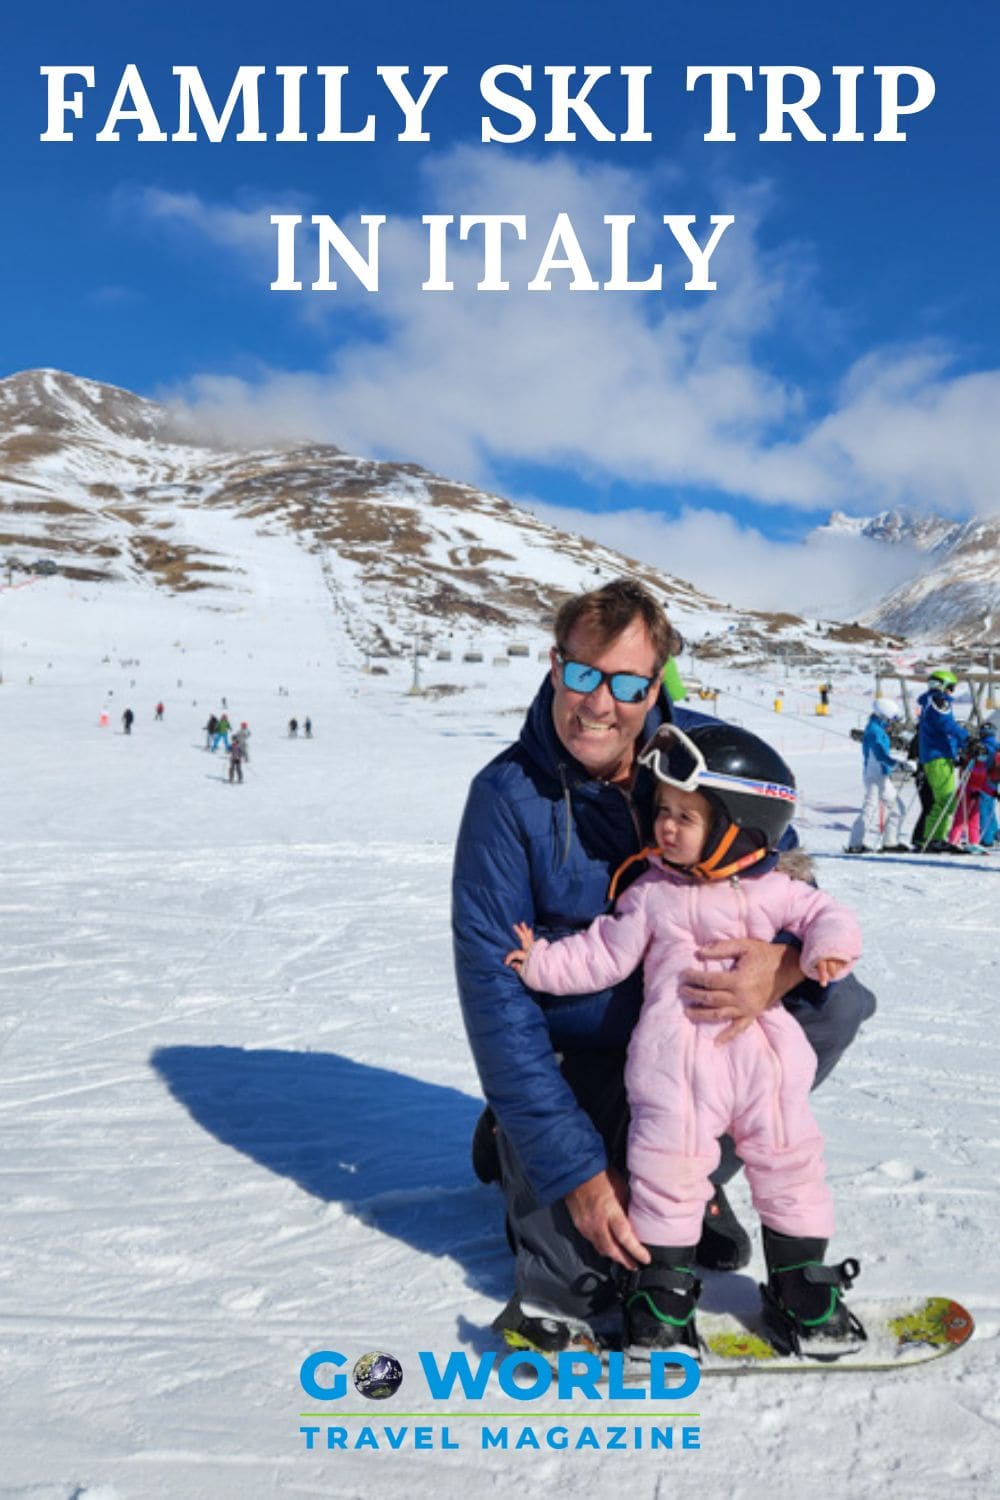 Discover why Passo Tonale is an ideal destination for skiing in Italy for the entire family, complete with kid-friendly and adult activities. #skiitaly